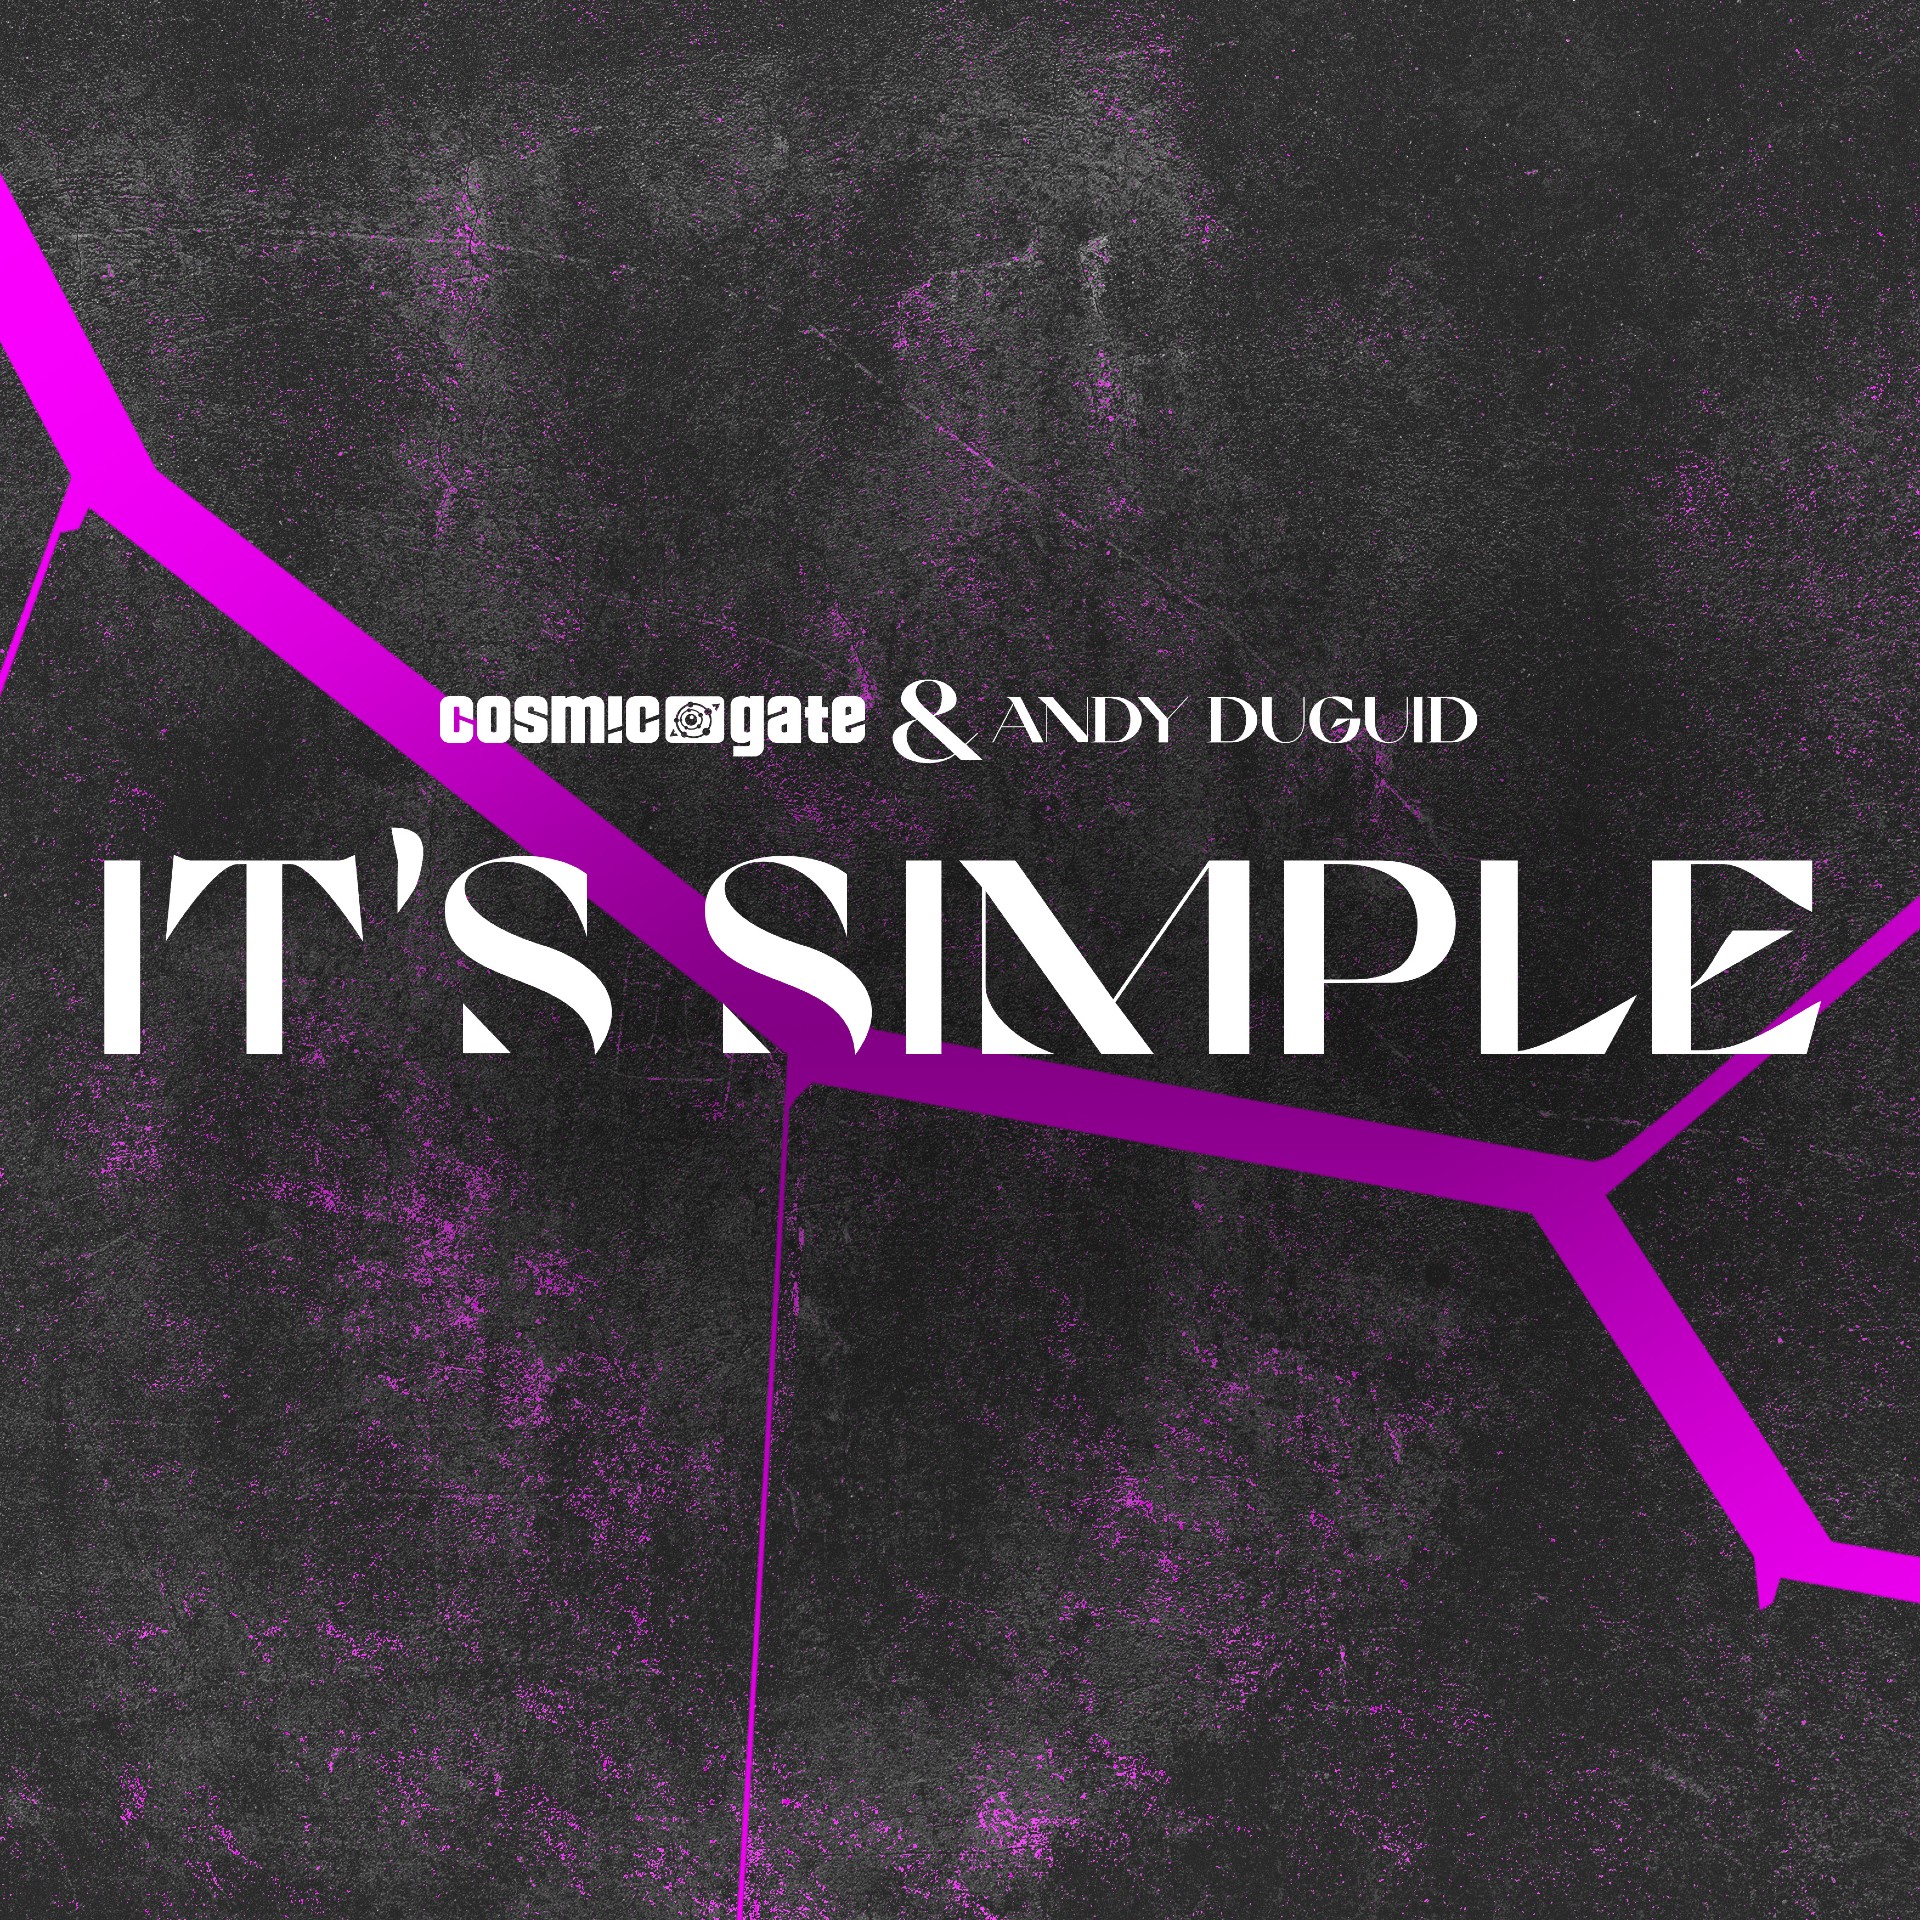 Cosmic Gate and Andy Duguid presents It's Simple on Black Hole Recordings